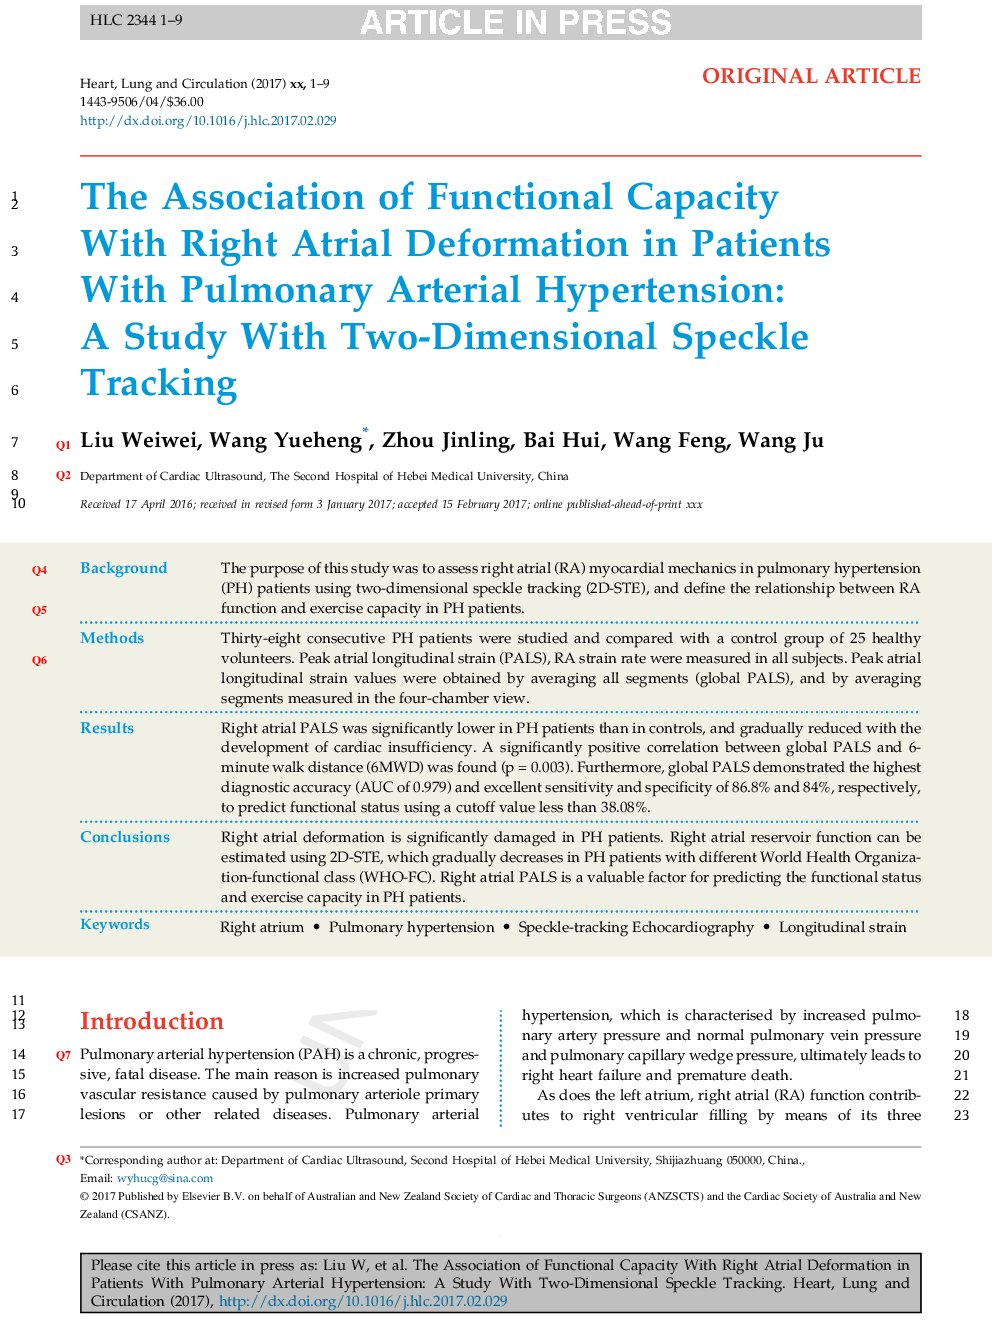 The Association of Functional Capacity With Right Atrial Deformation in Patients With Pulmonary Arterial Hypertension: A Study With Two-Dimensional Speckle Tracking